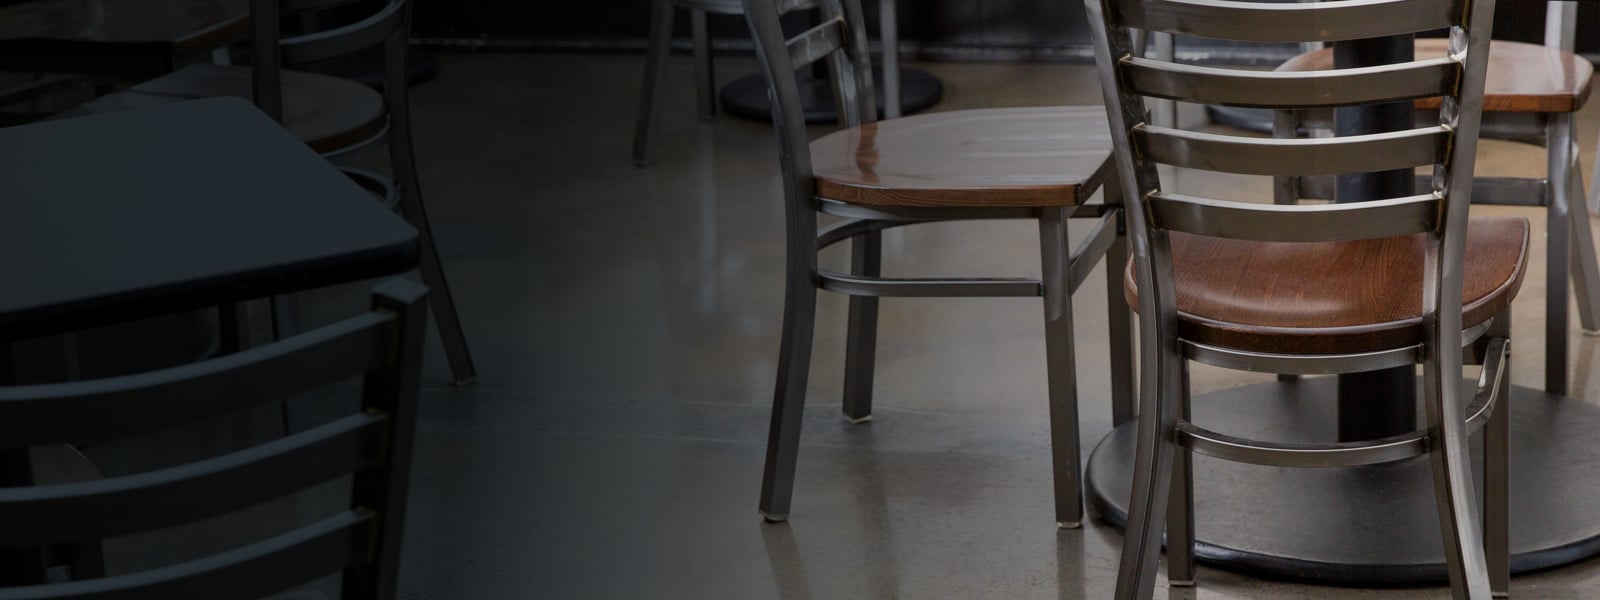 Restaurant Furniture Supply  Restaurant Chairs and Tables